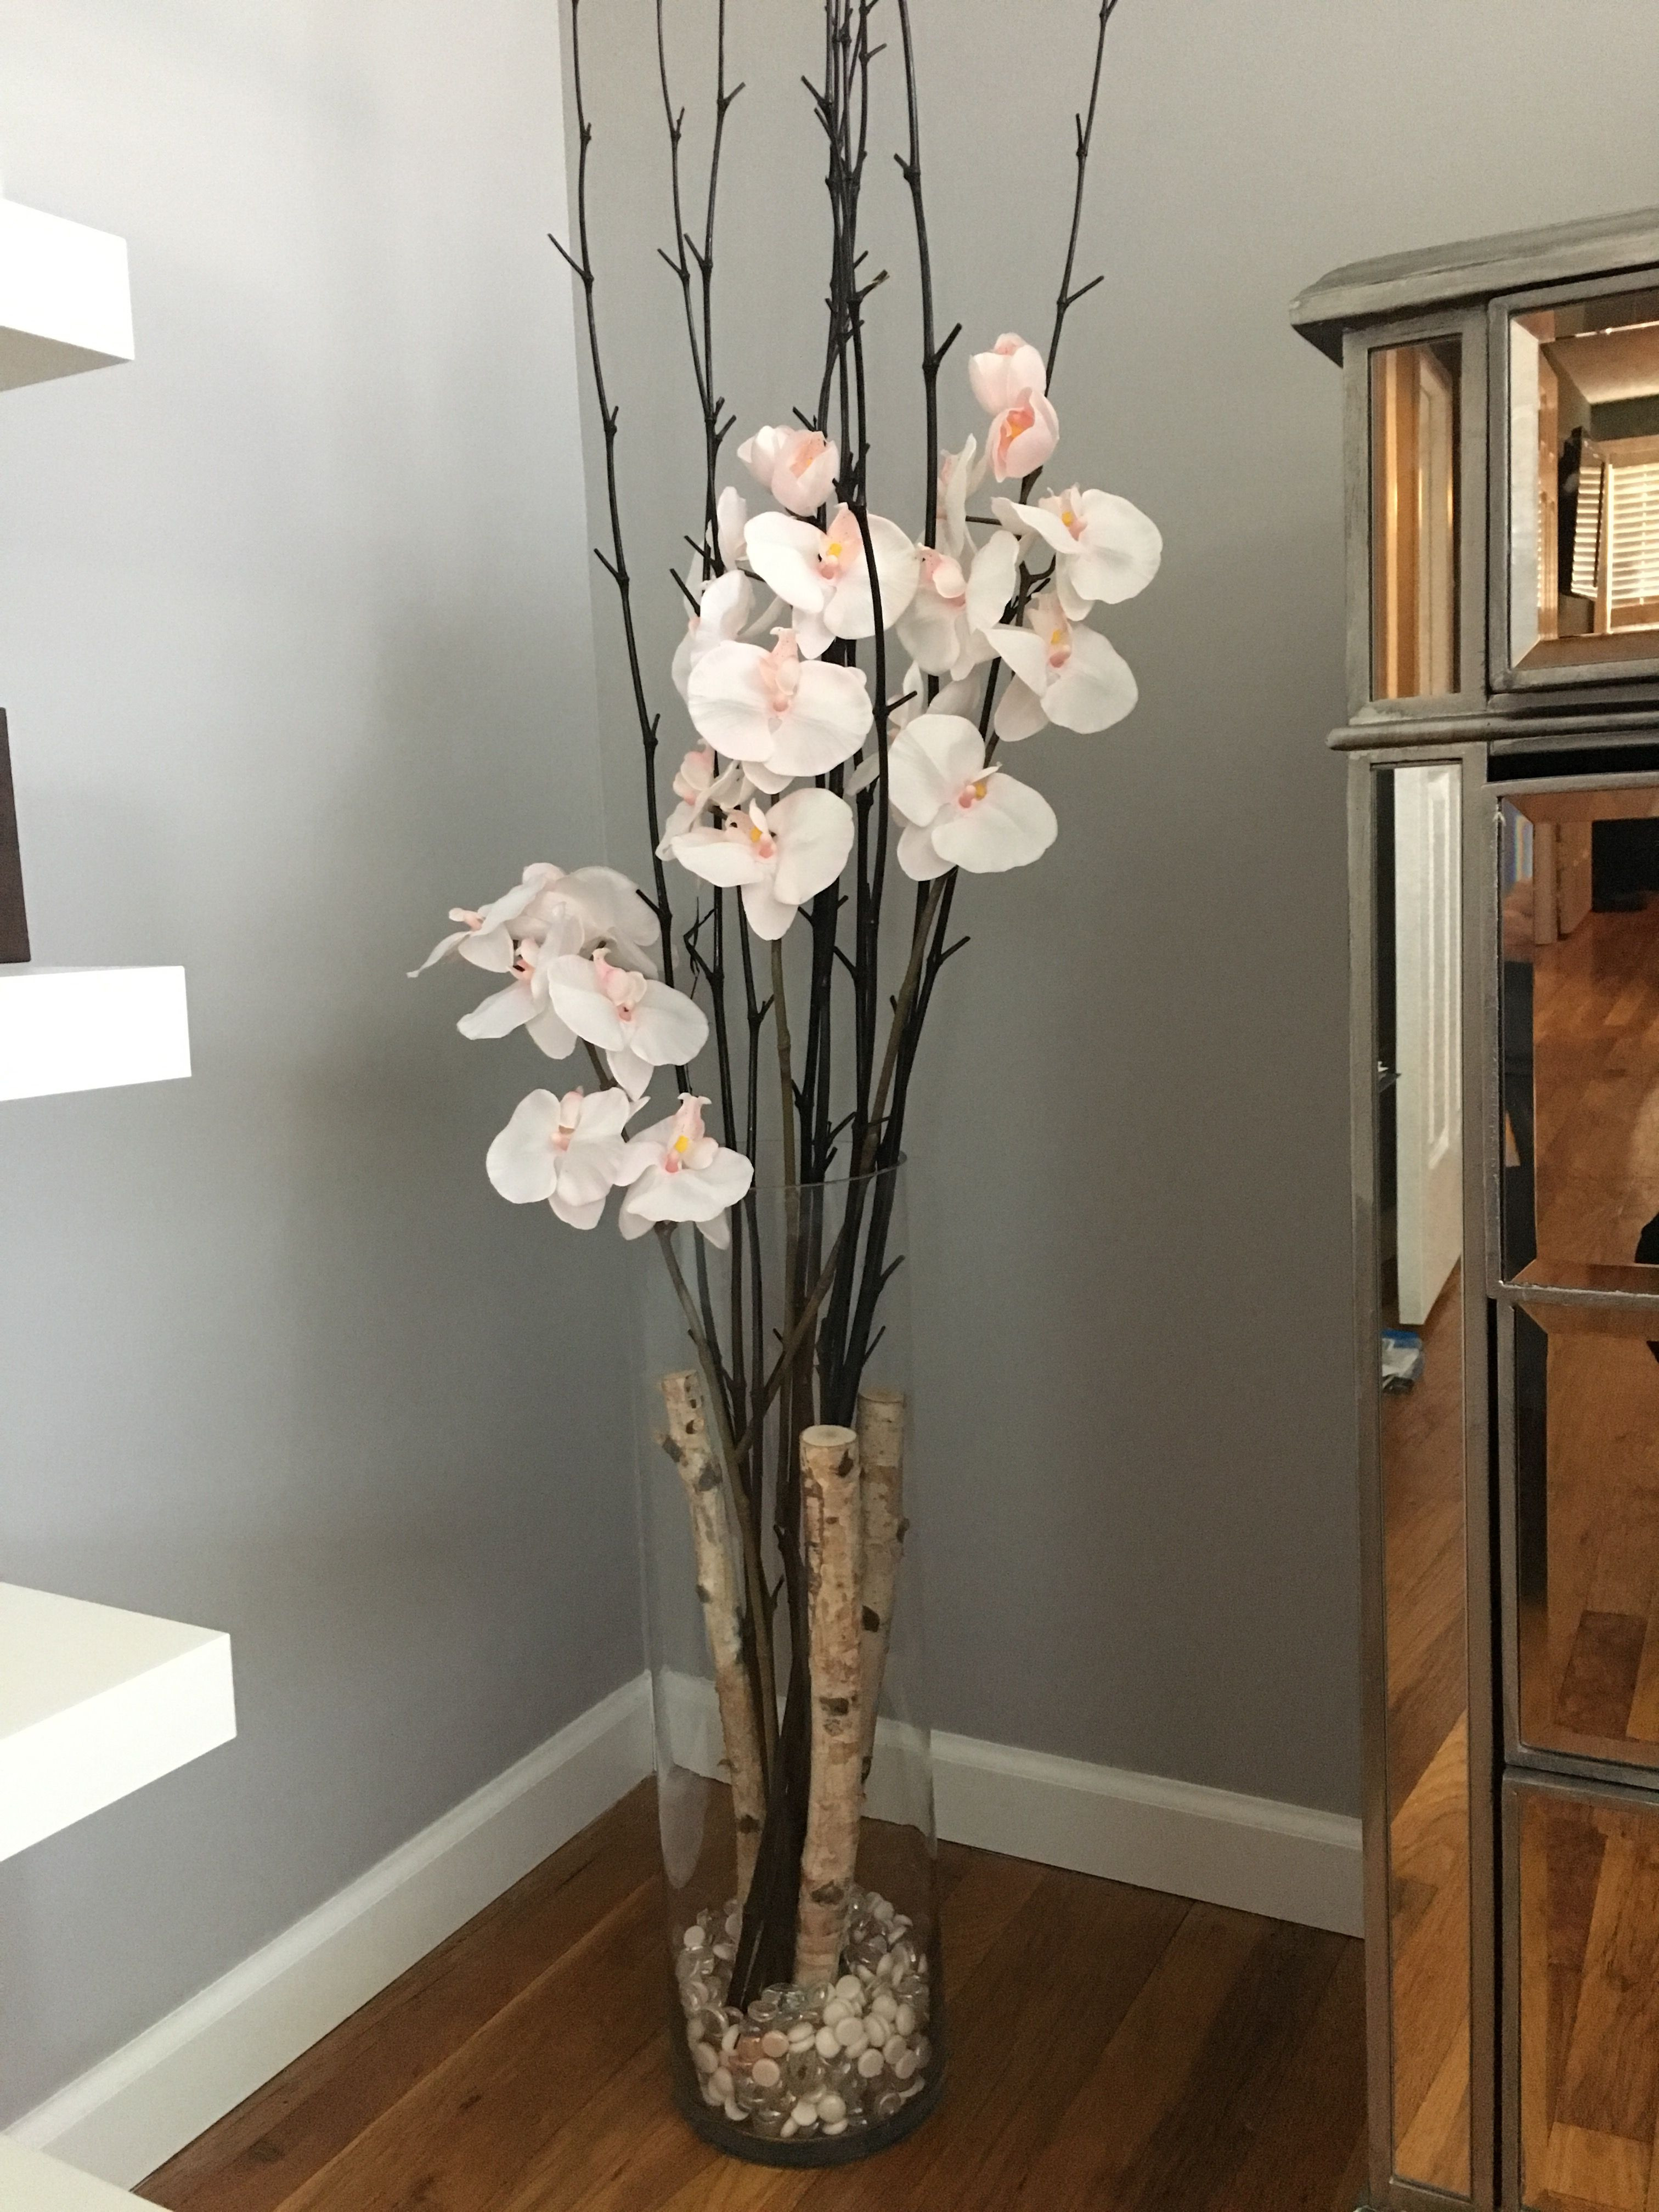 26 Stylish Floor Vase with Branches 2024 free download floor vase with branches of floor vase branches photograph ikea interior design best pe s5h with floor vase branches pictures orchid flower floor vase crafty diy decor of floor vase branches